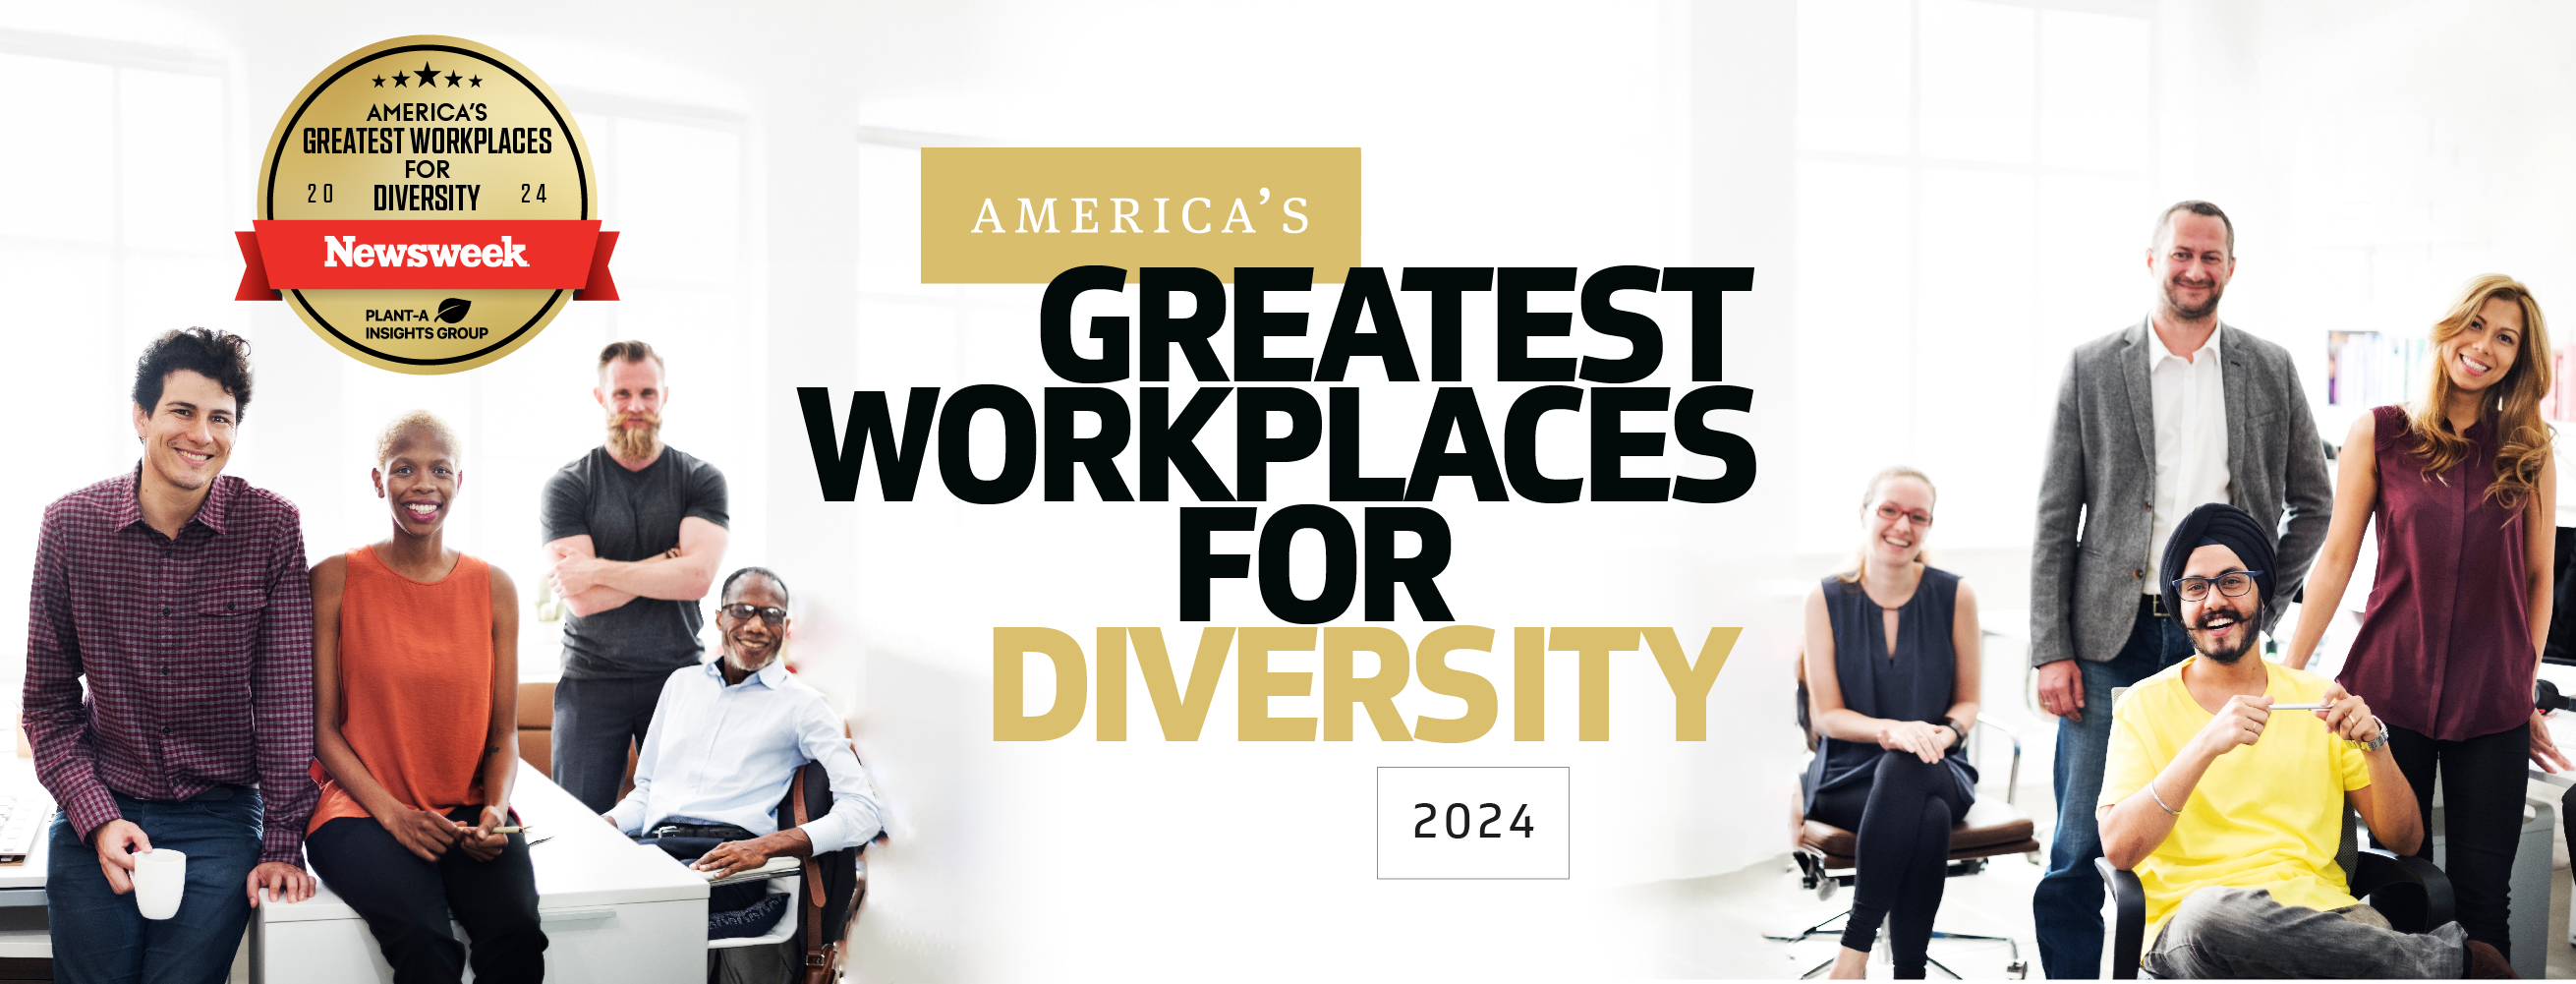 America's Greatest Workplaces for Diversity 2024